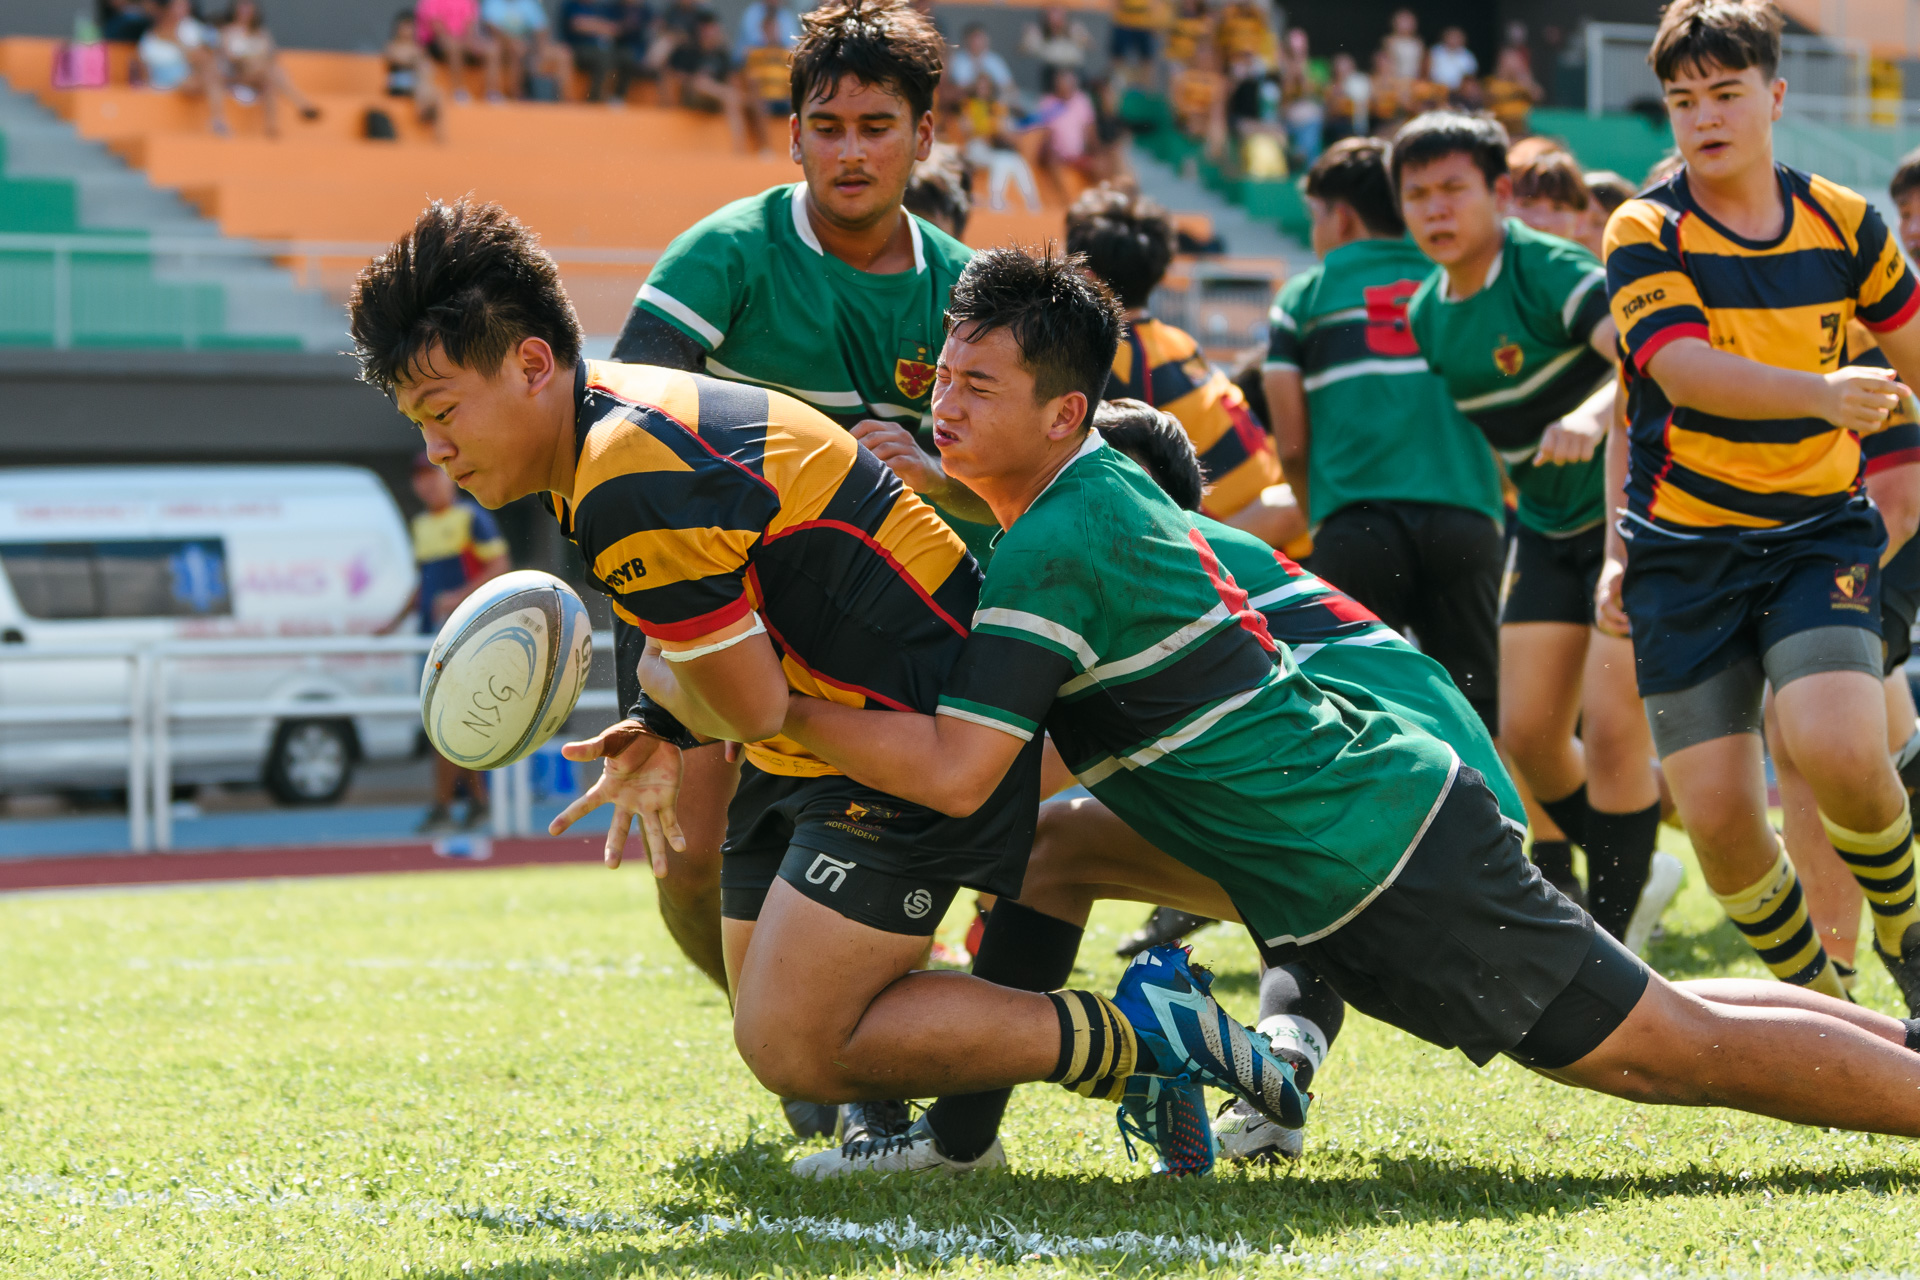 ACS(I)’s Ames Leung (AC #1) spills the ball over the try line while caught in the tackles of RI’s Ashton Yong (#6) and Gregory Wee (#30). (Photo 17 © Joash Chow/Red Sports)